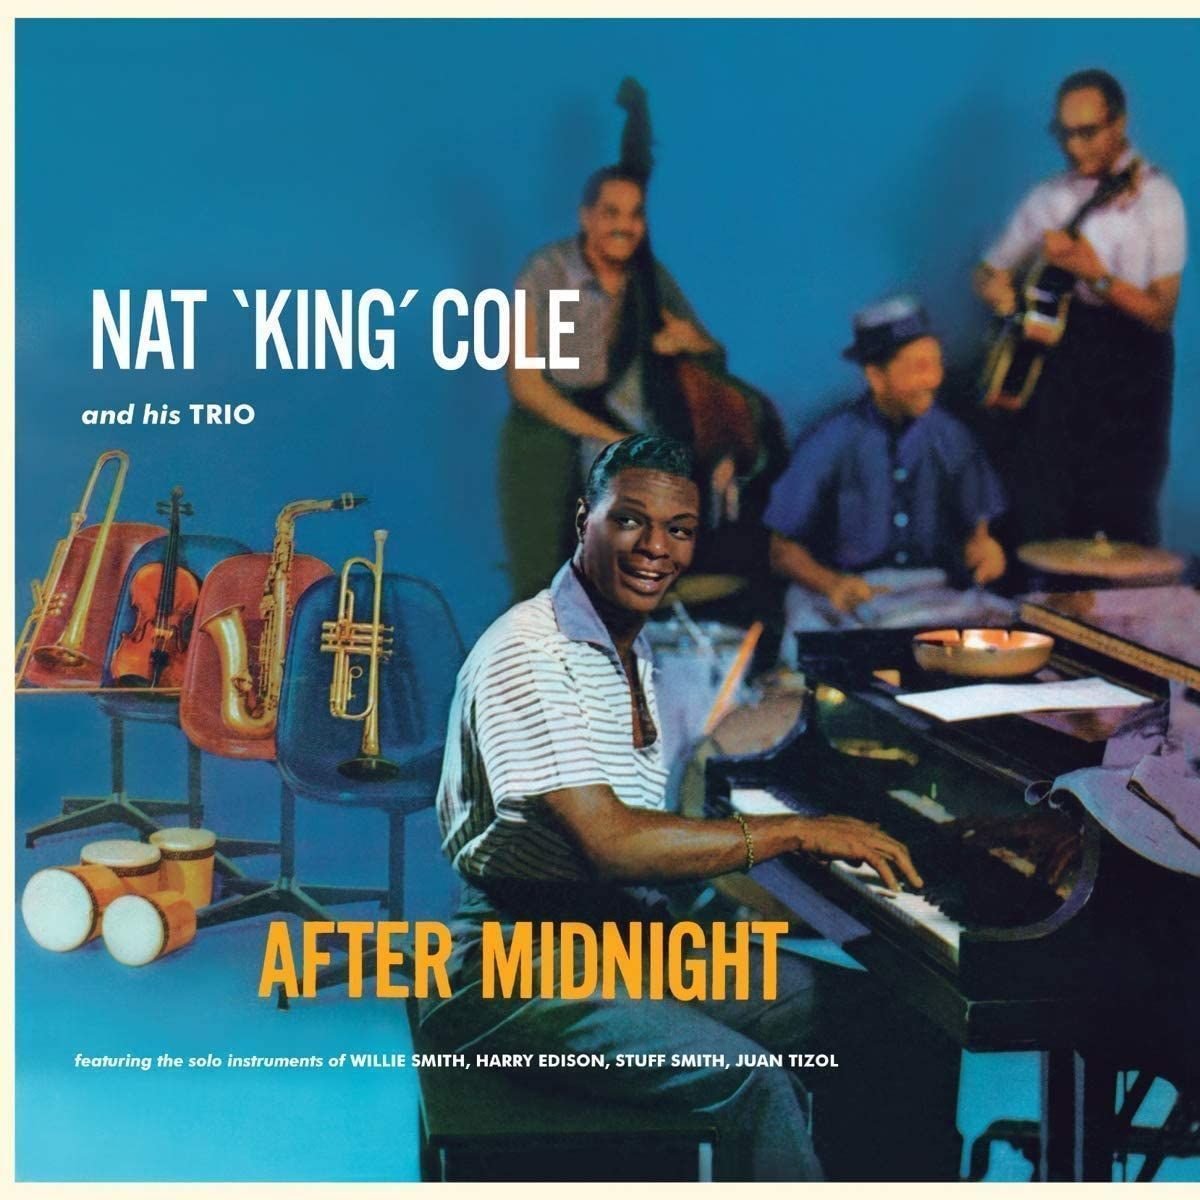 Vinyl Record Nat King Cole - After Midnight (3 LP)